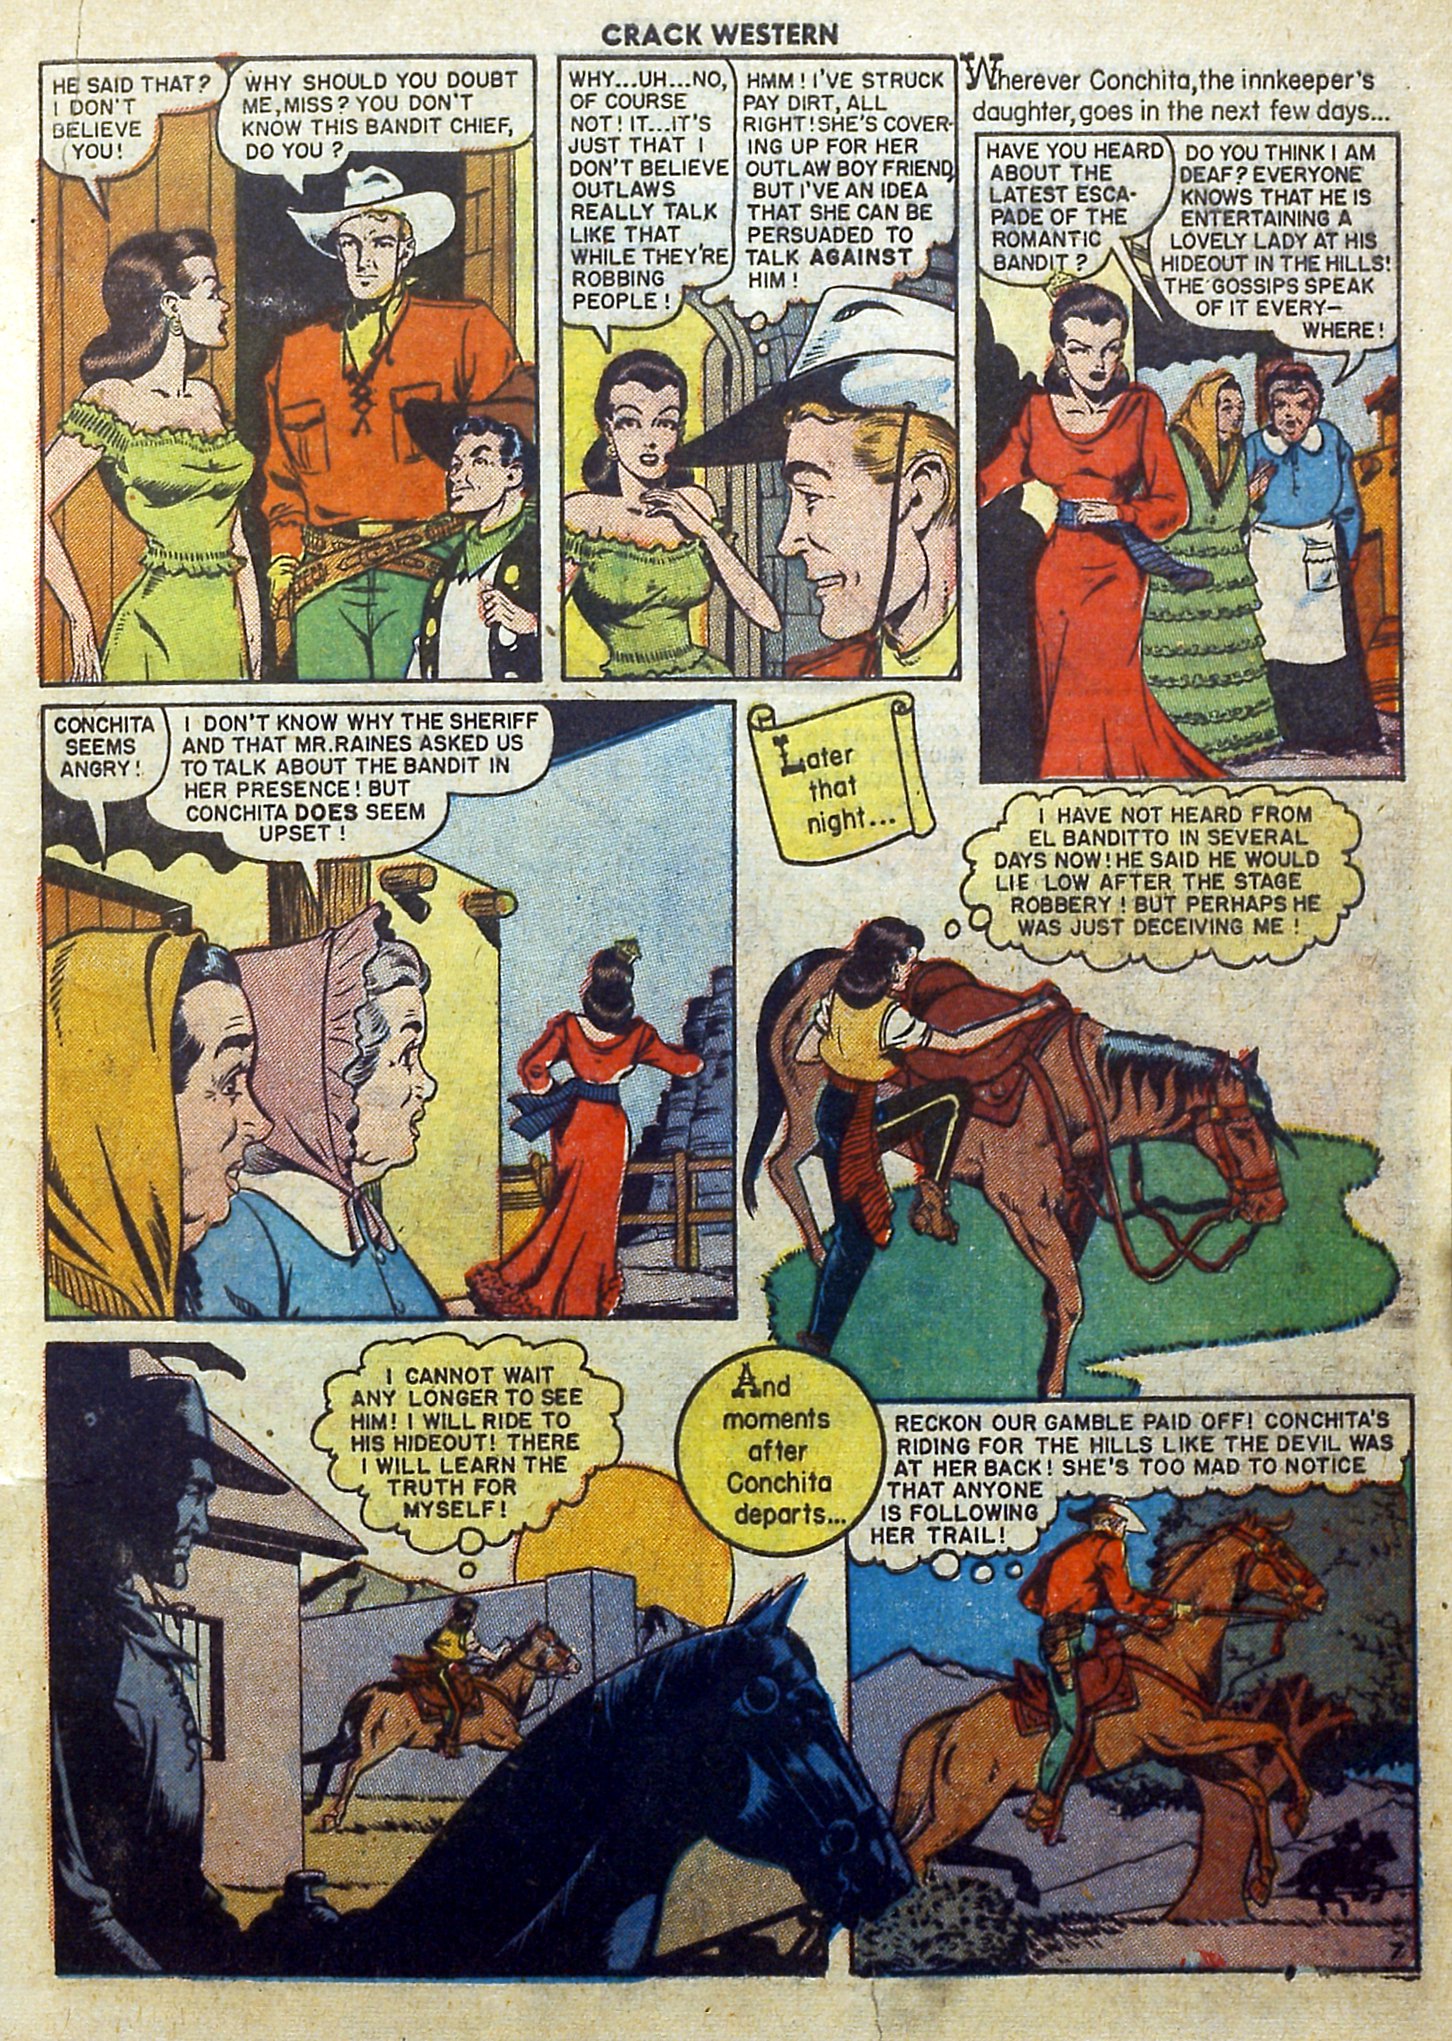 Read online Crack Western comic -  Issue #66 - 9